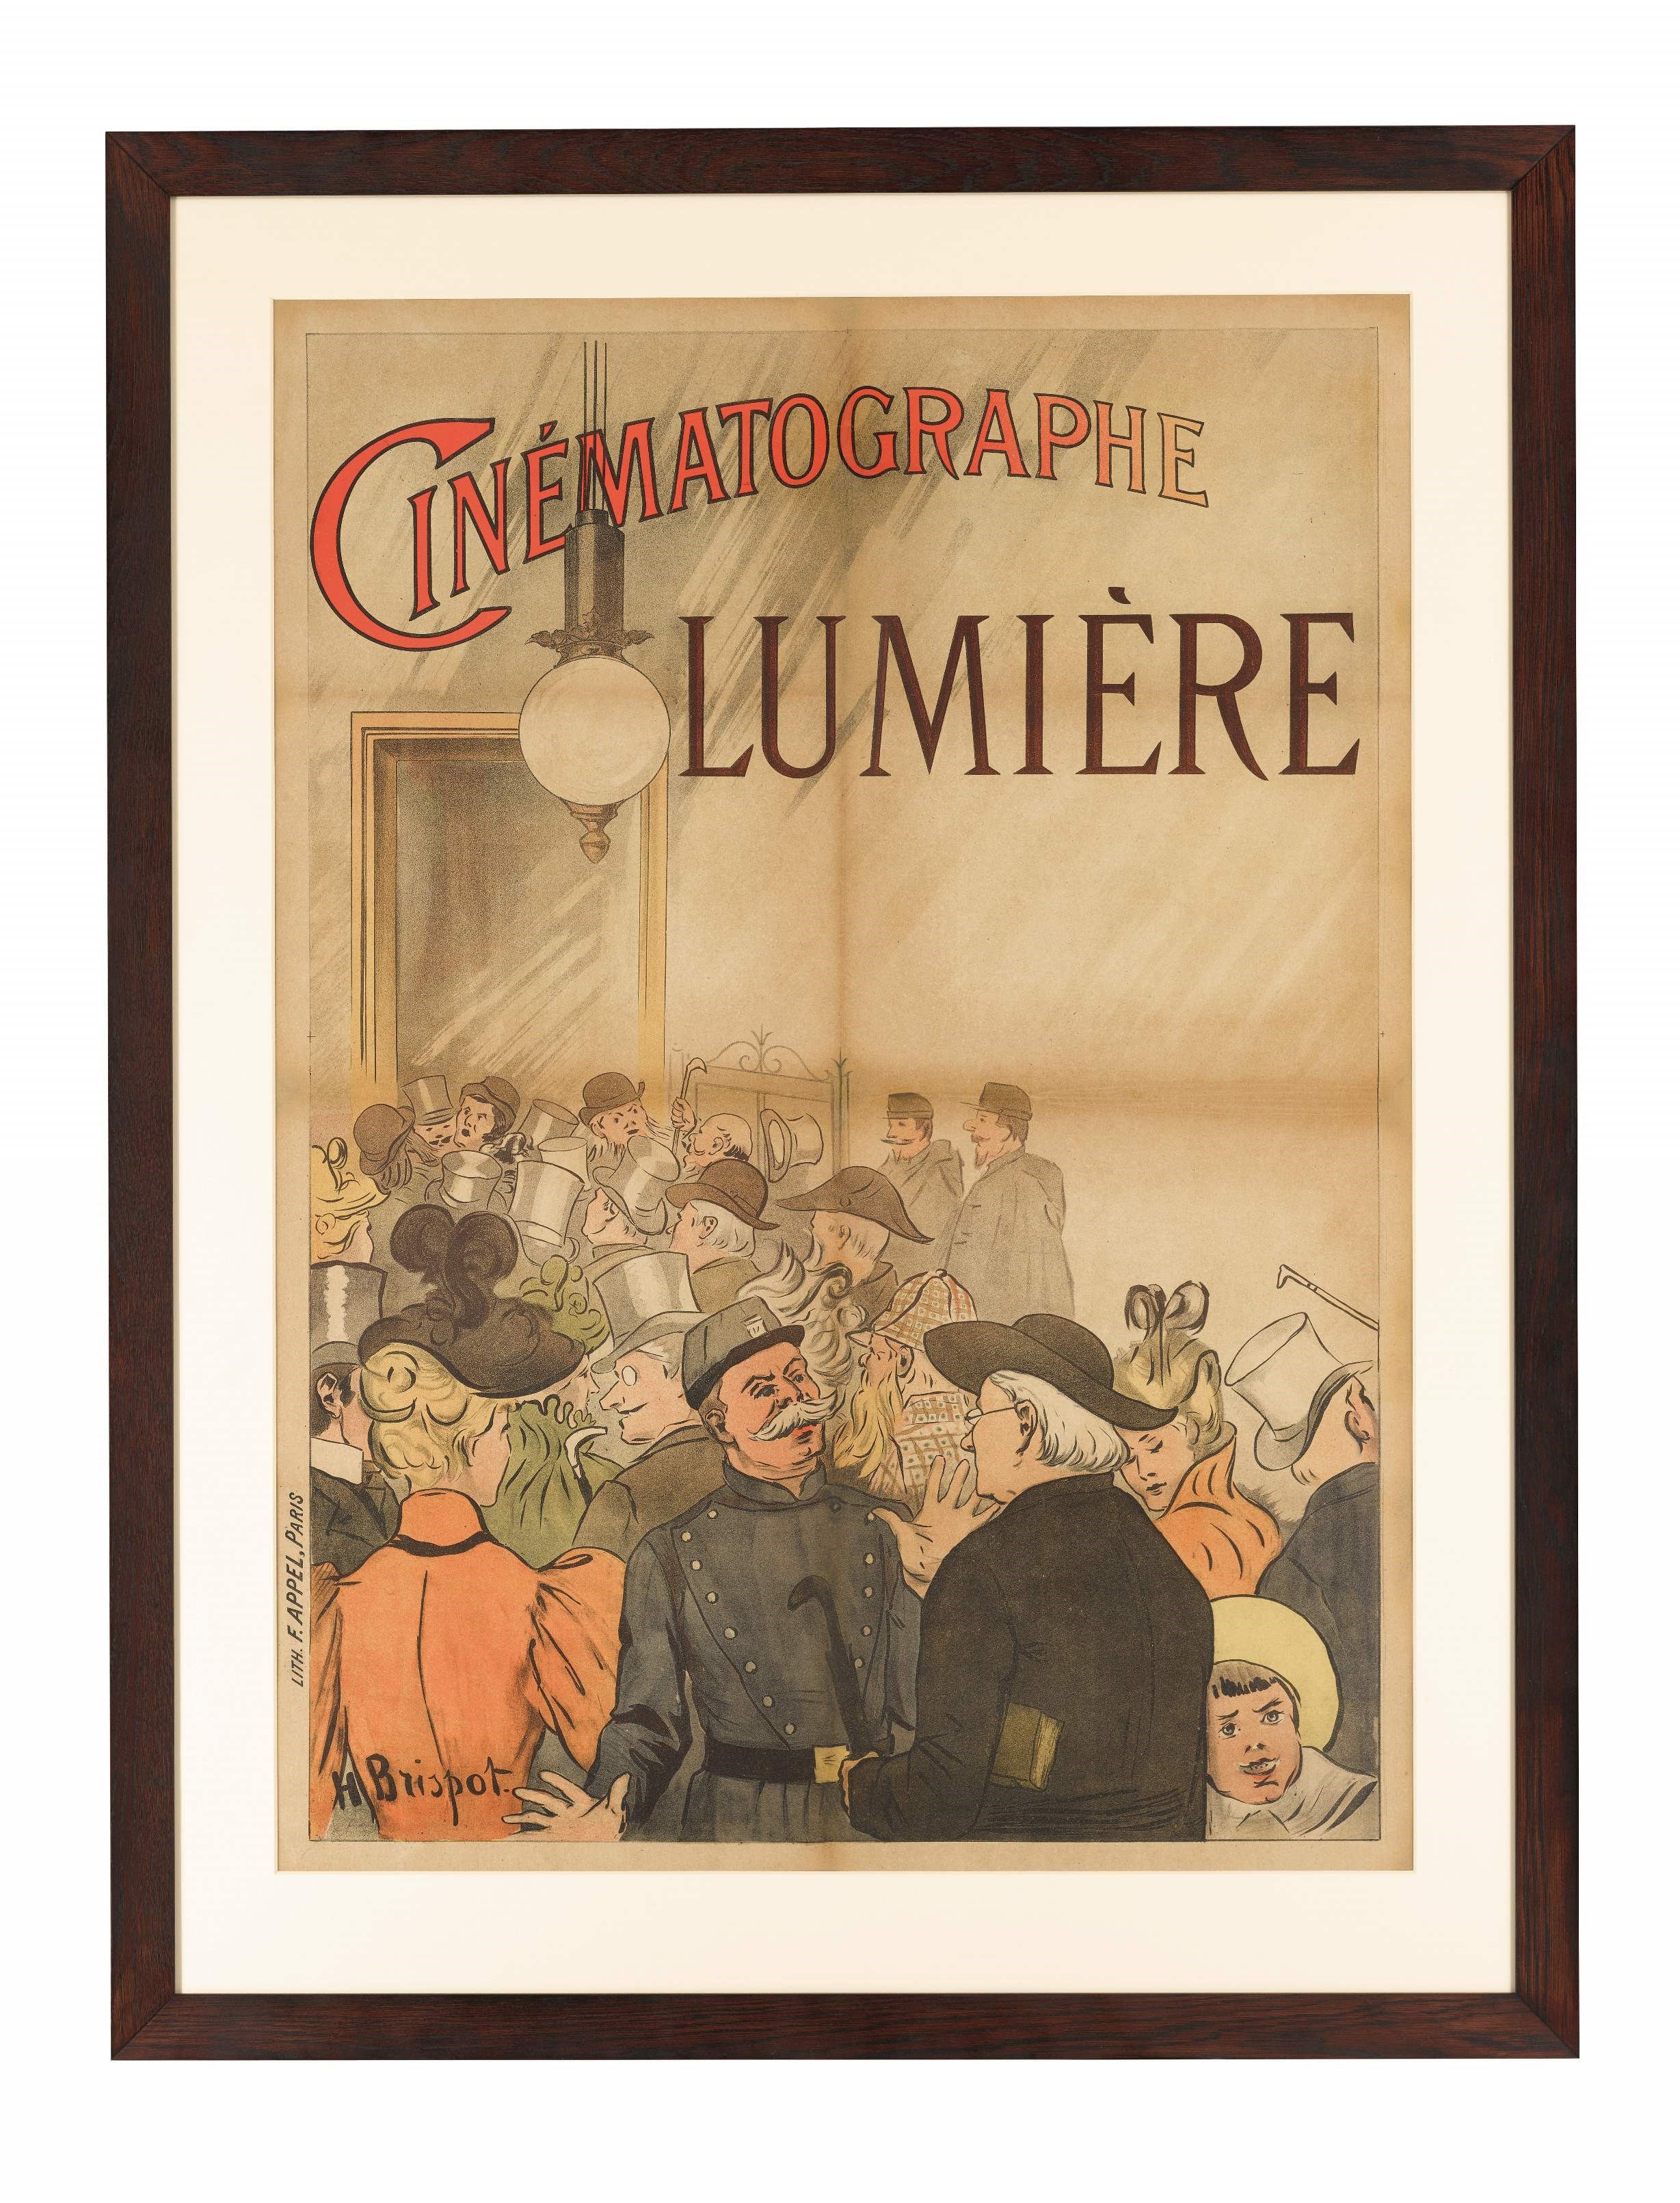 The world's first film poster is going under-the-hammer (Sotheby's)